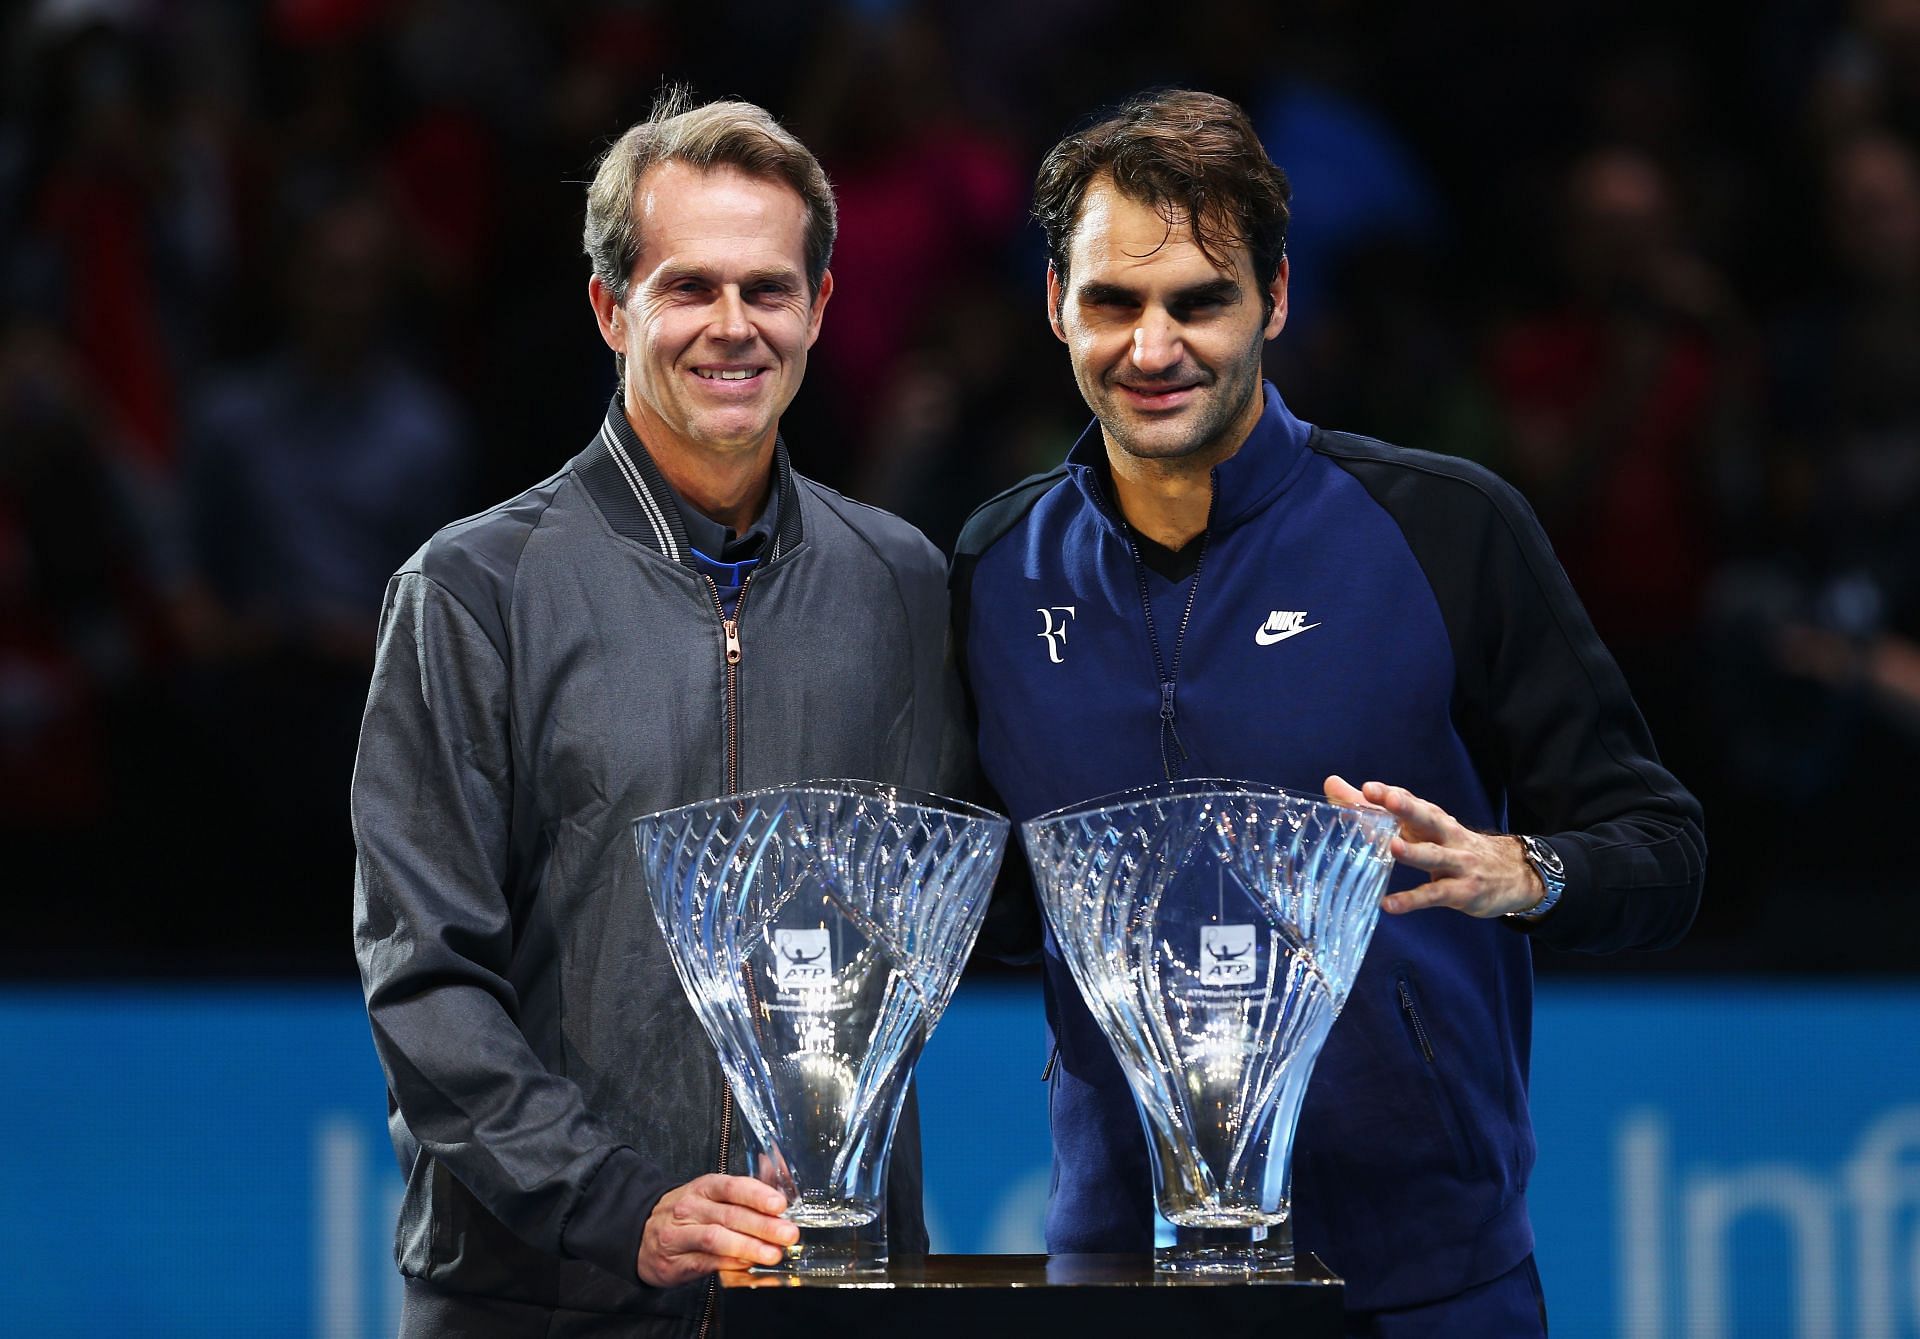 Stefan Edberg coached Roger Federer for two years